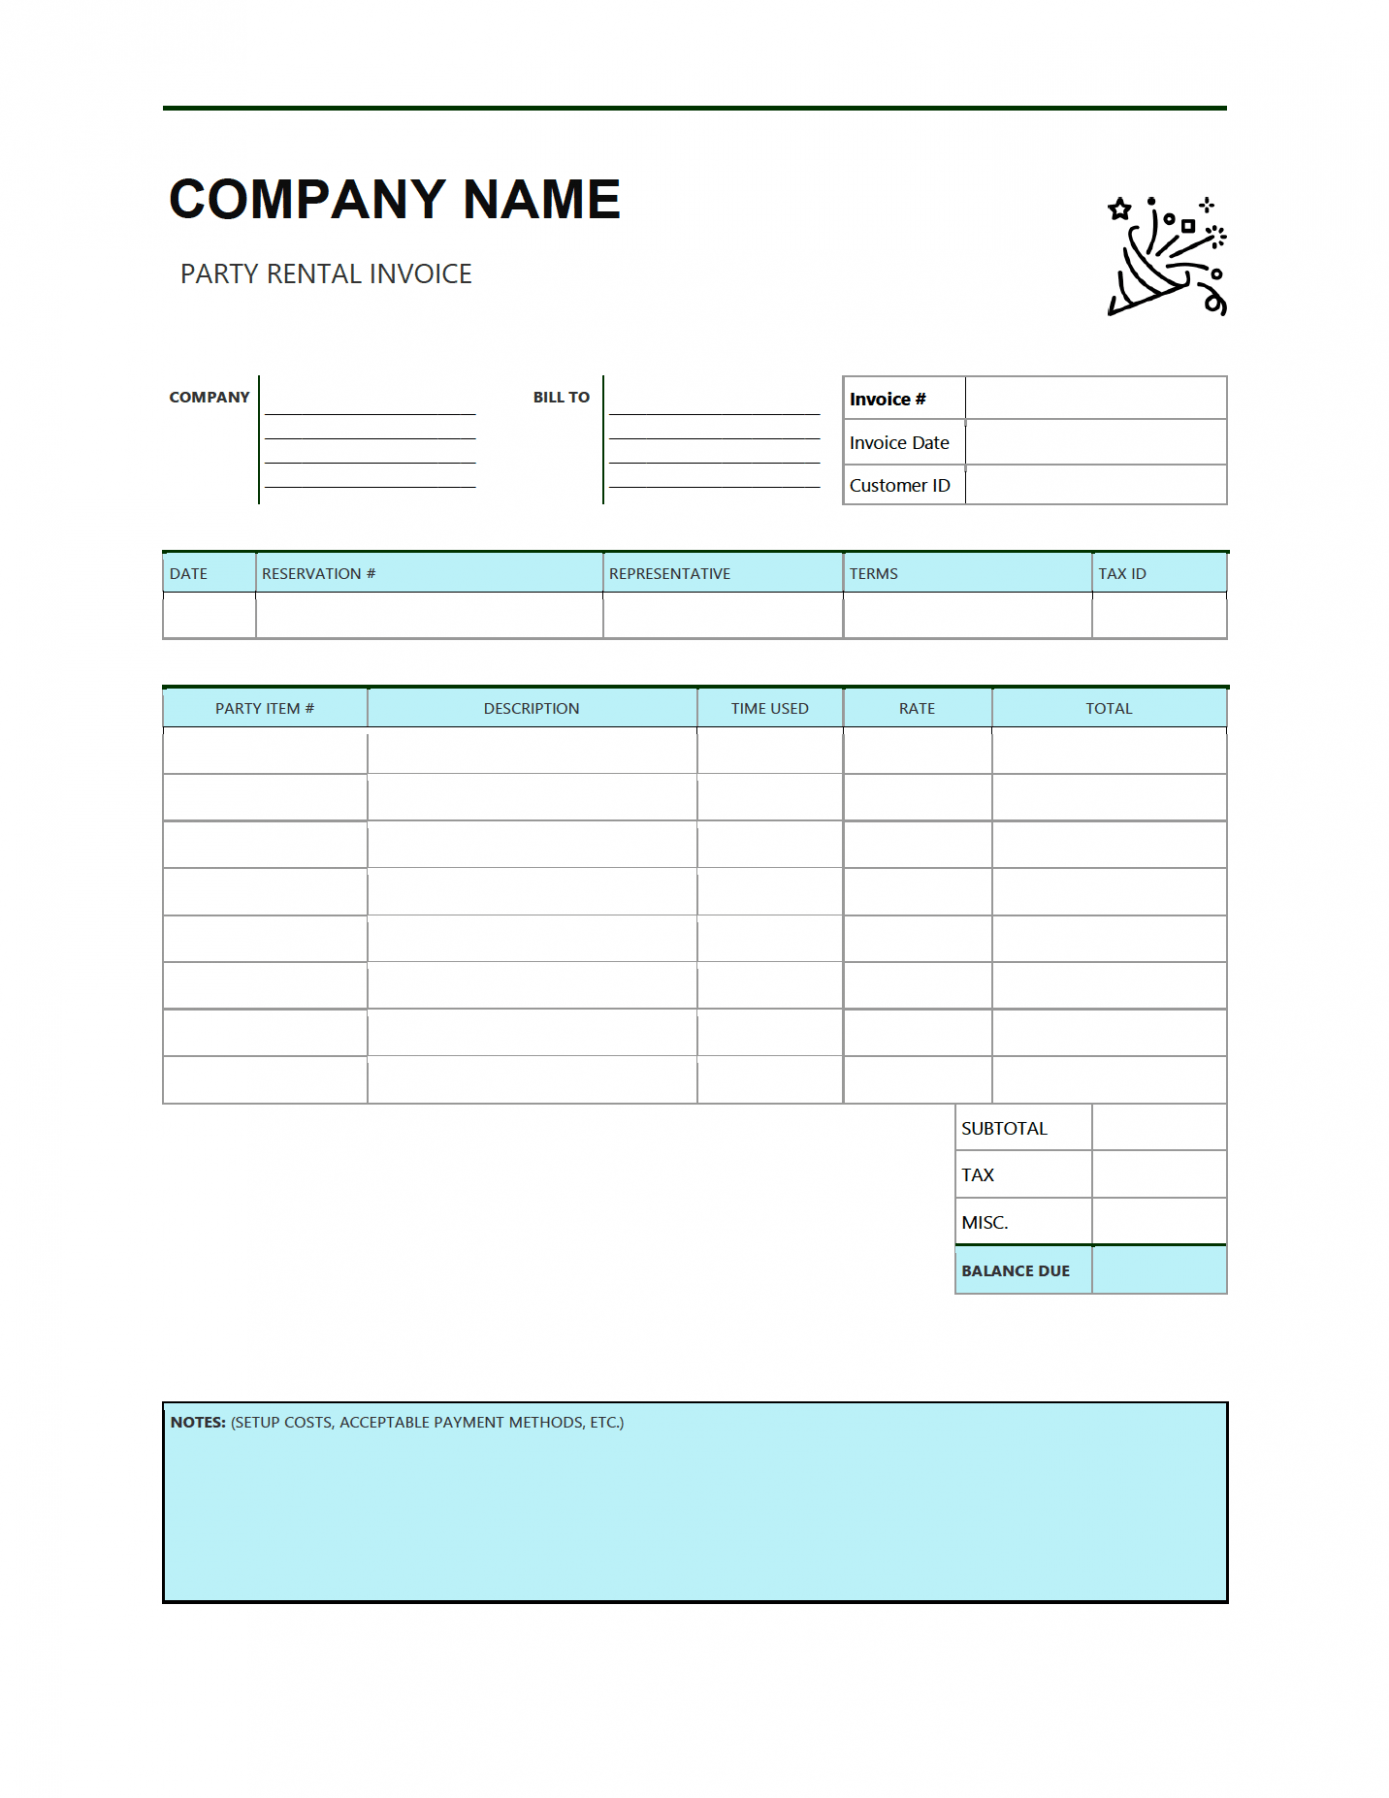 Printable Party Rental Invoice Template Word